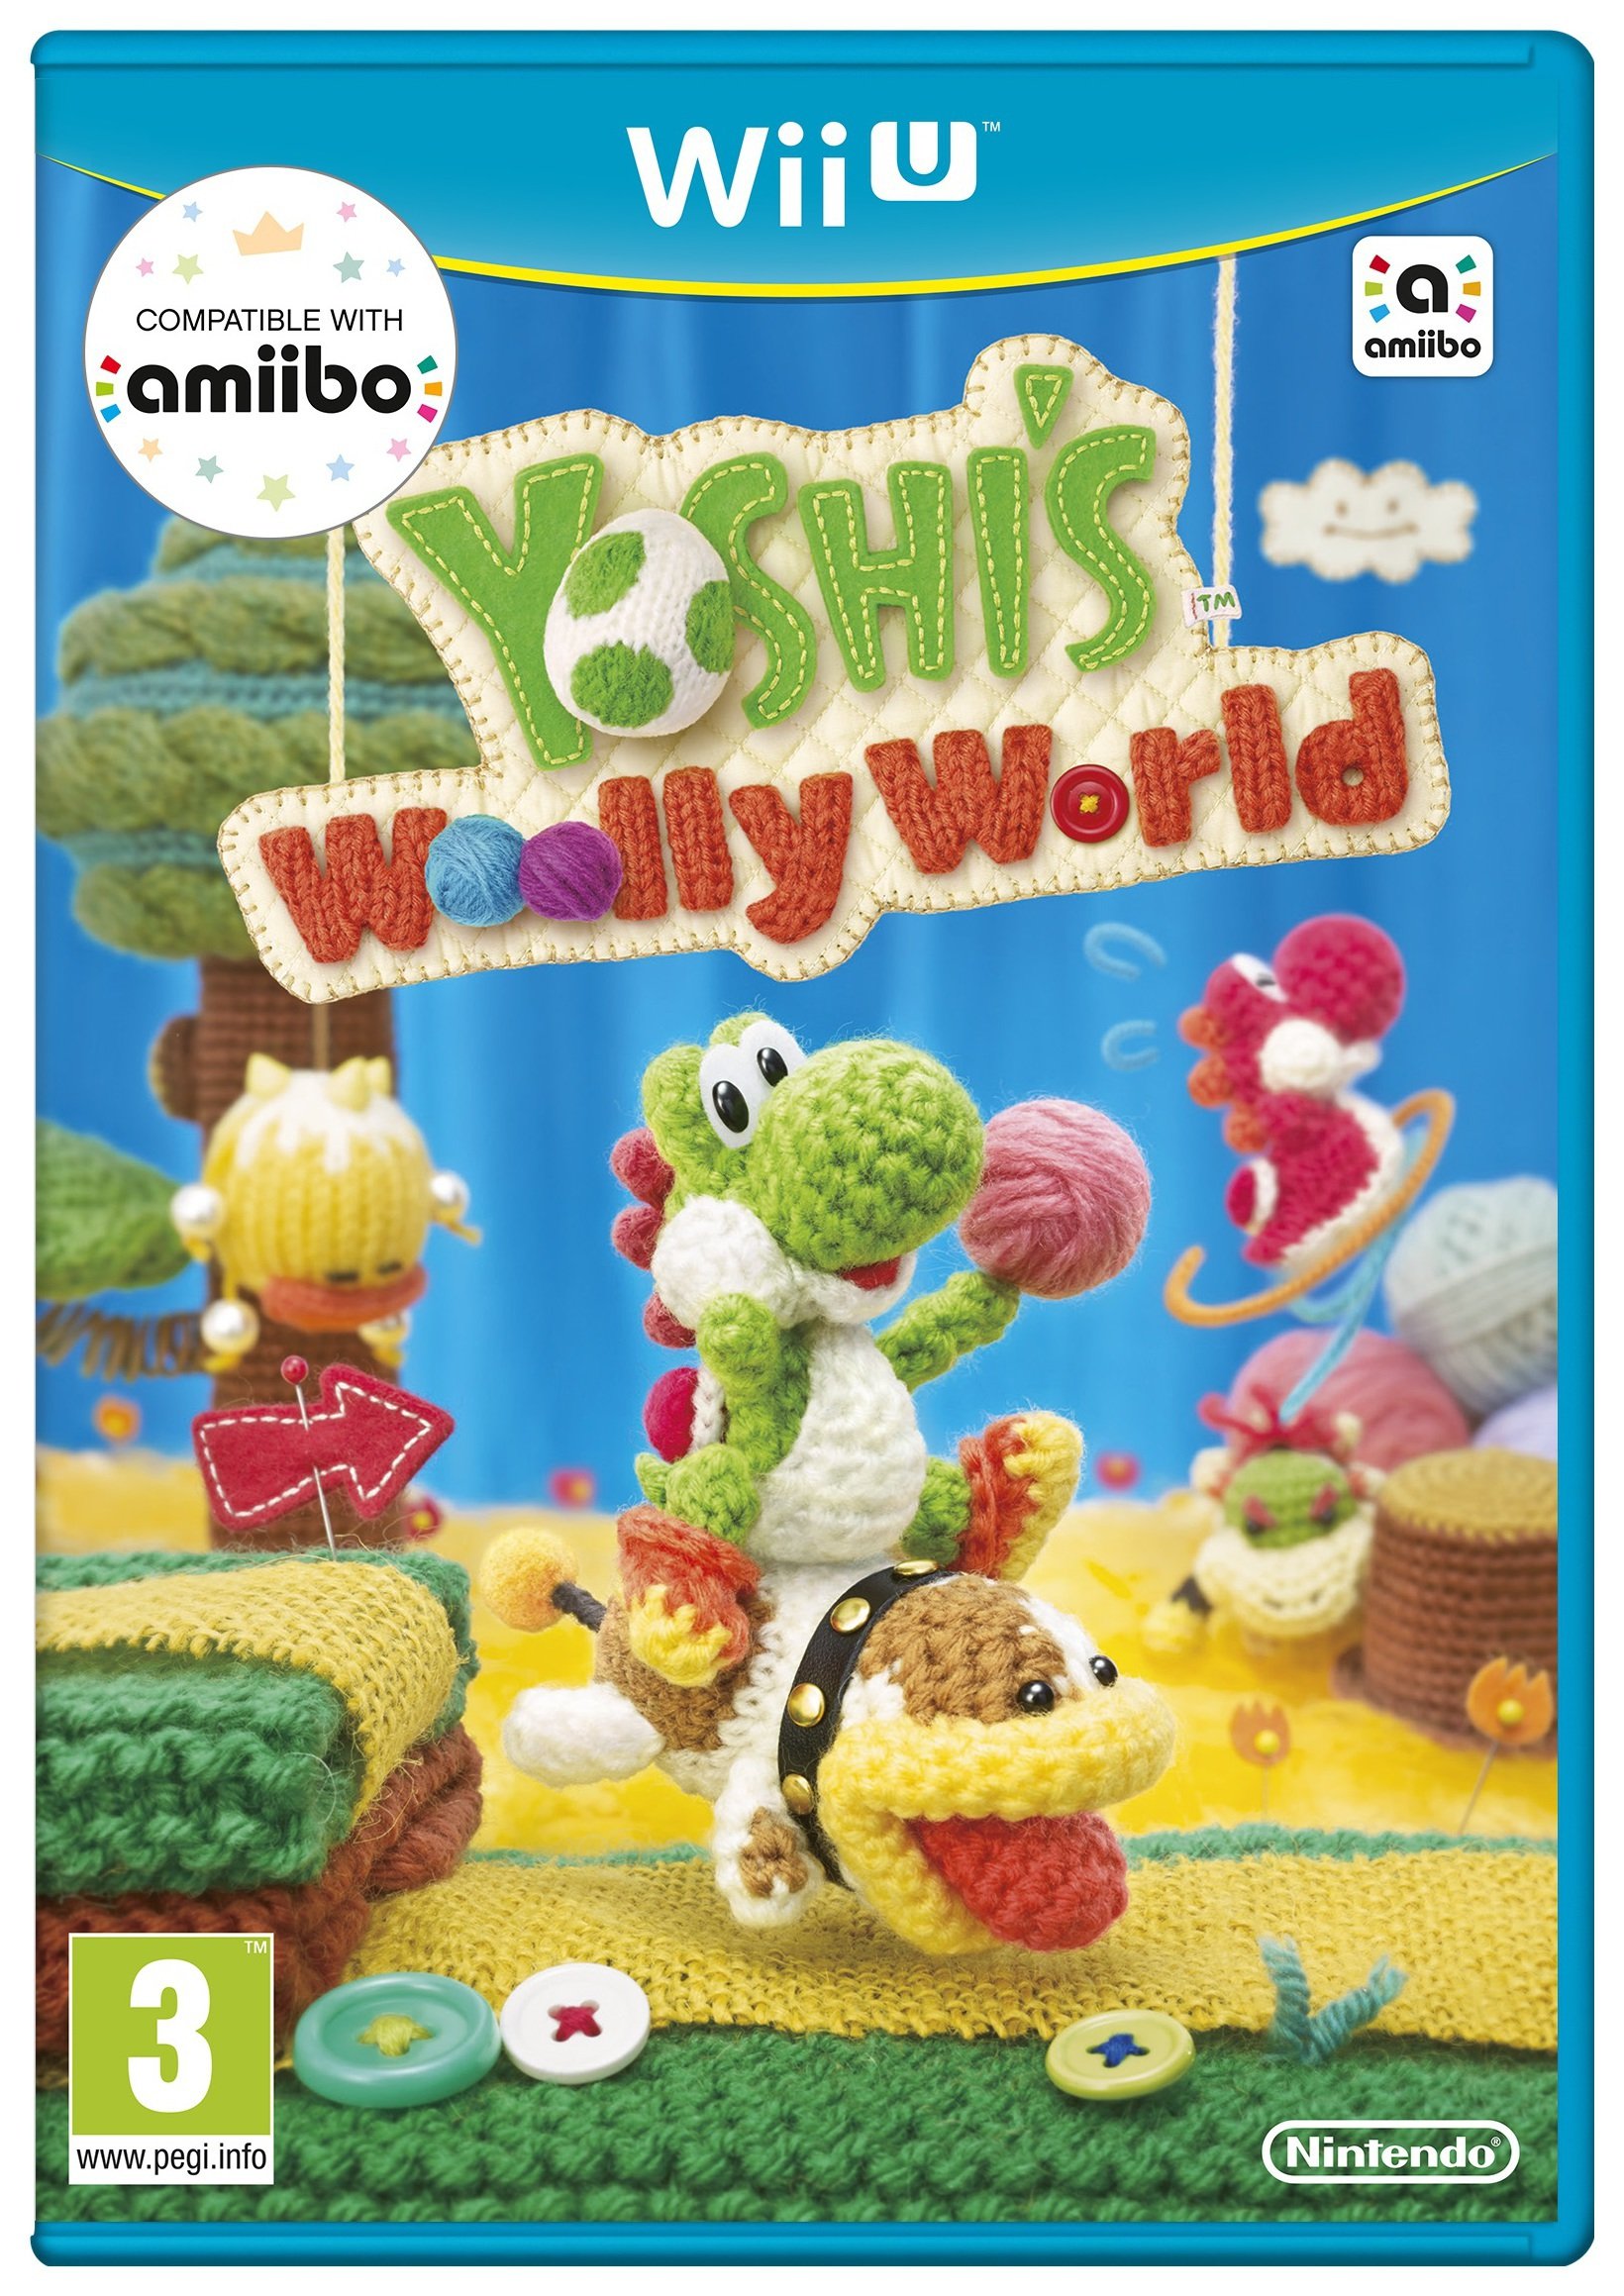 Yoshi's Woolly World - Wii U Game Review